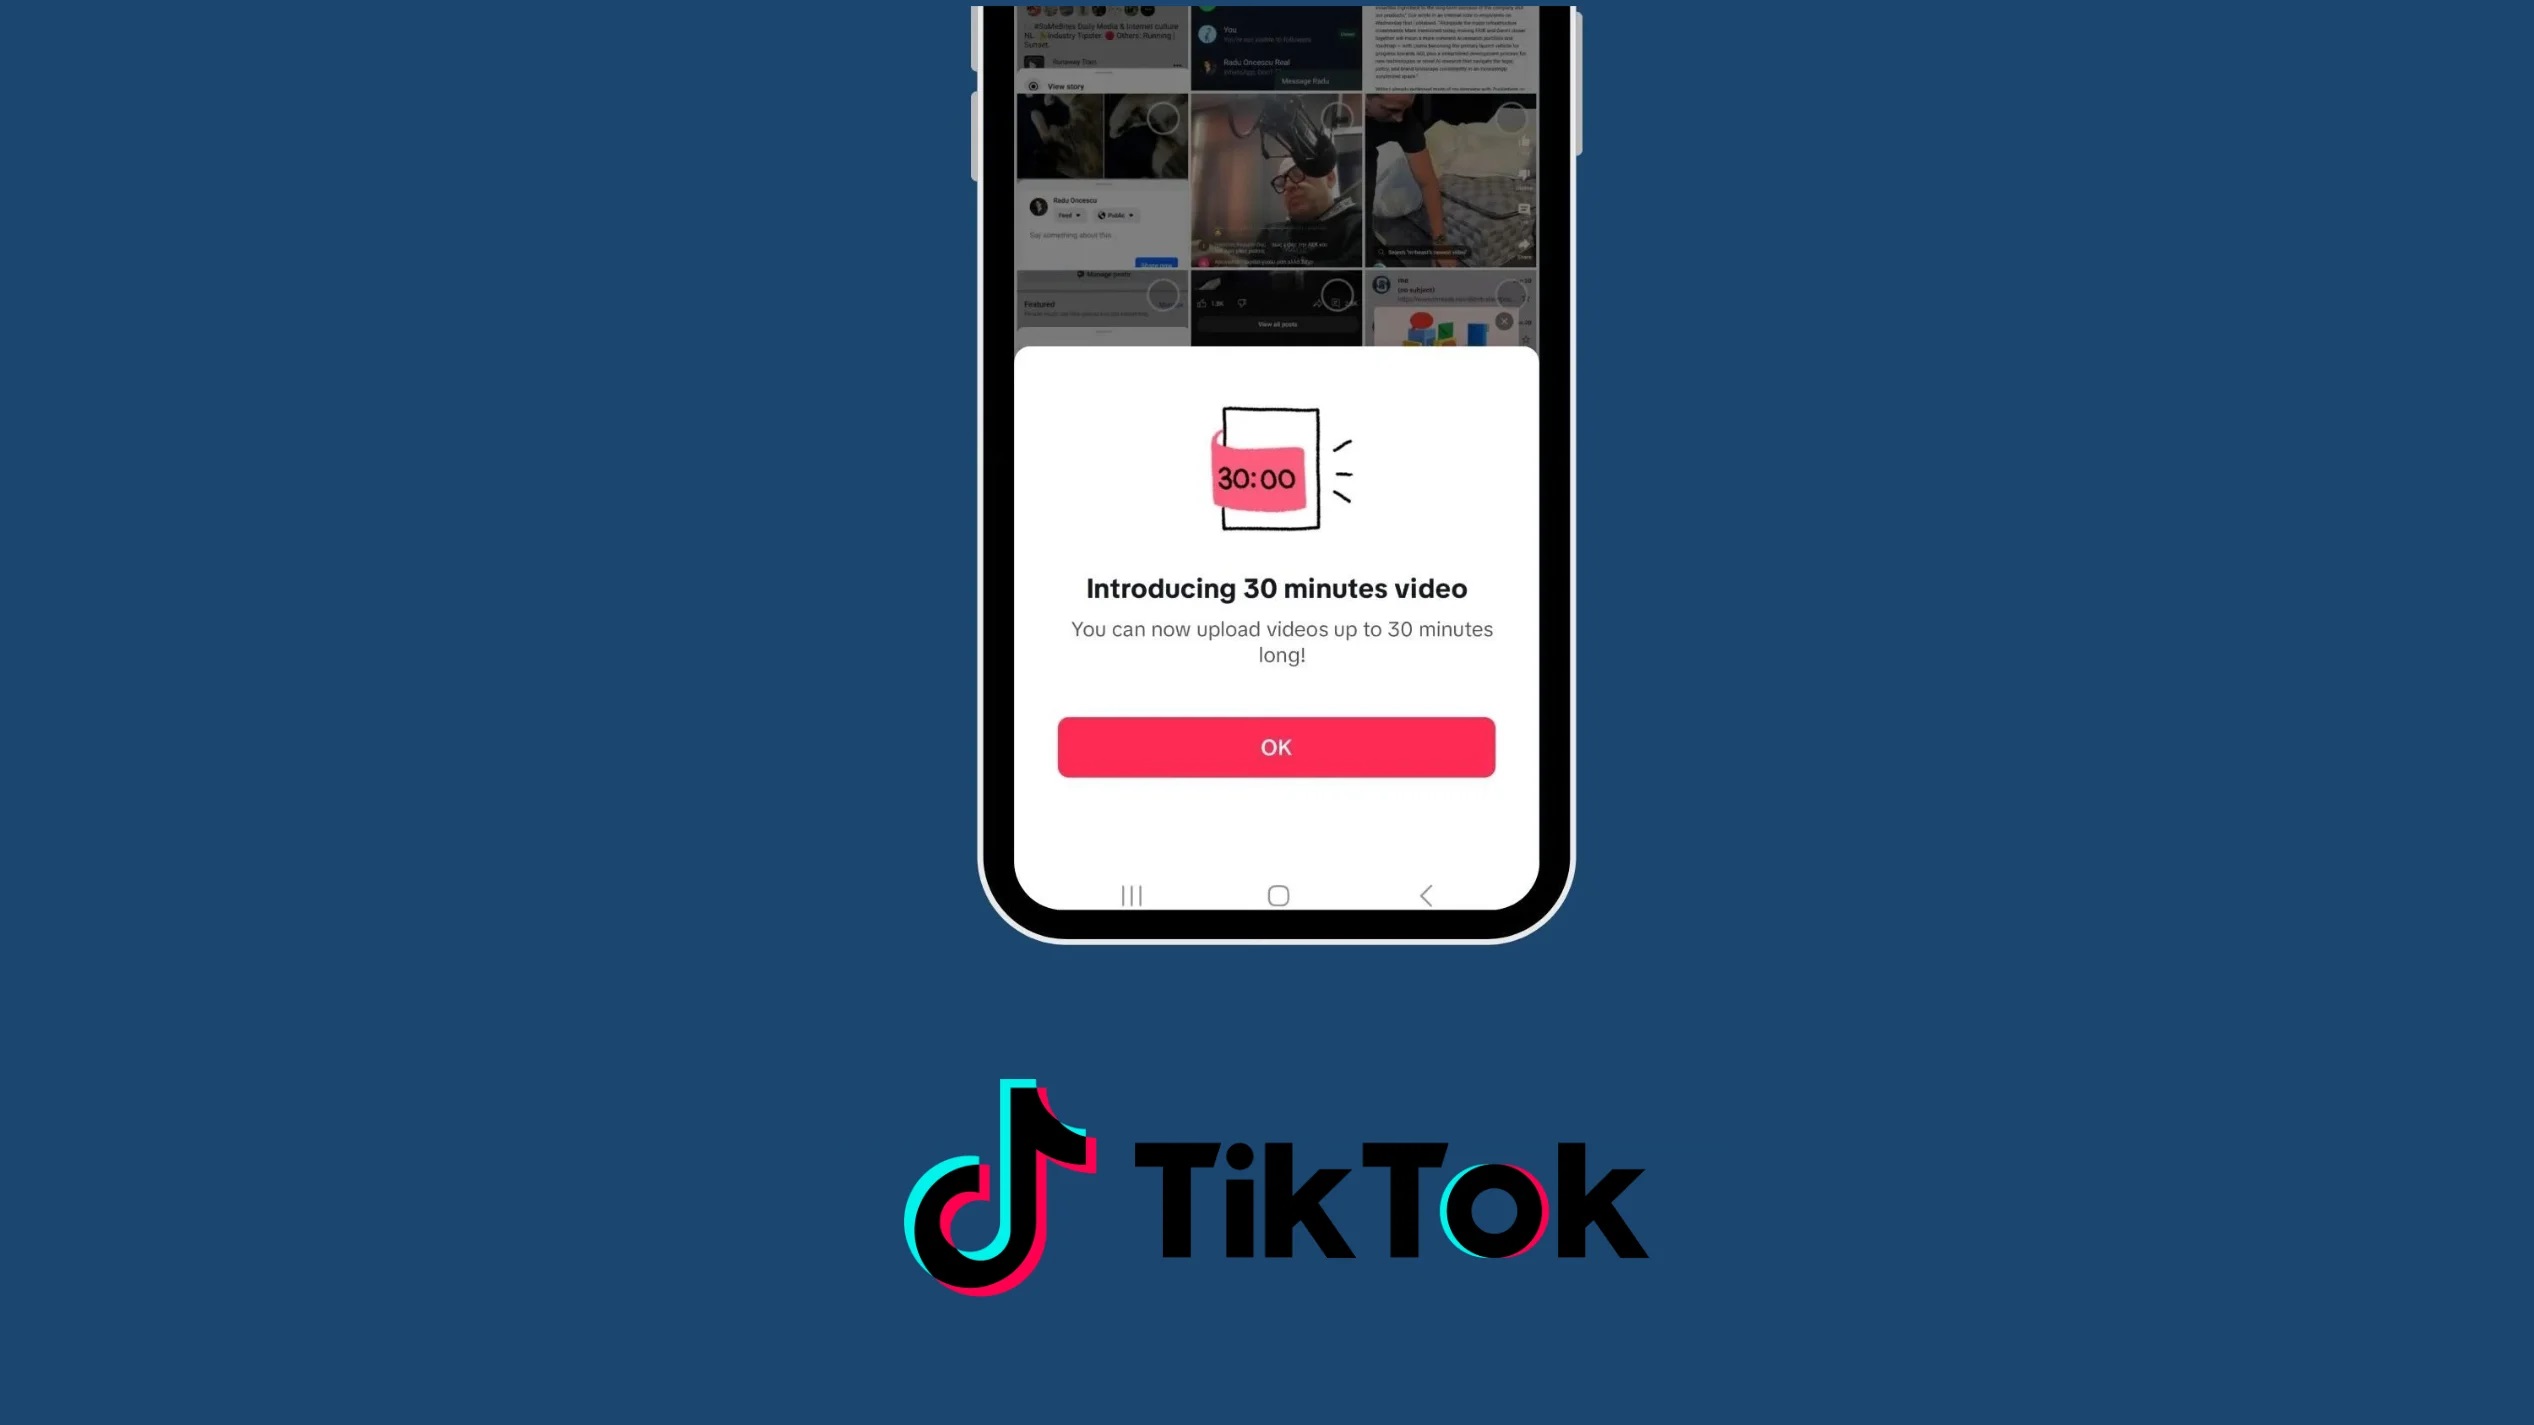 TikTok Testing 30-Minute Uploads To Compete With YouTube